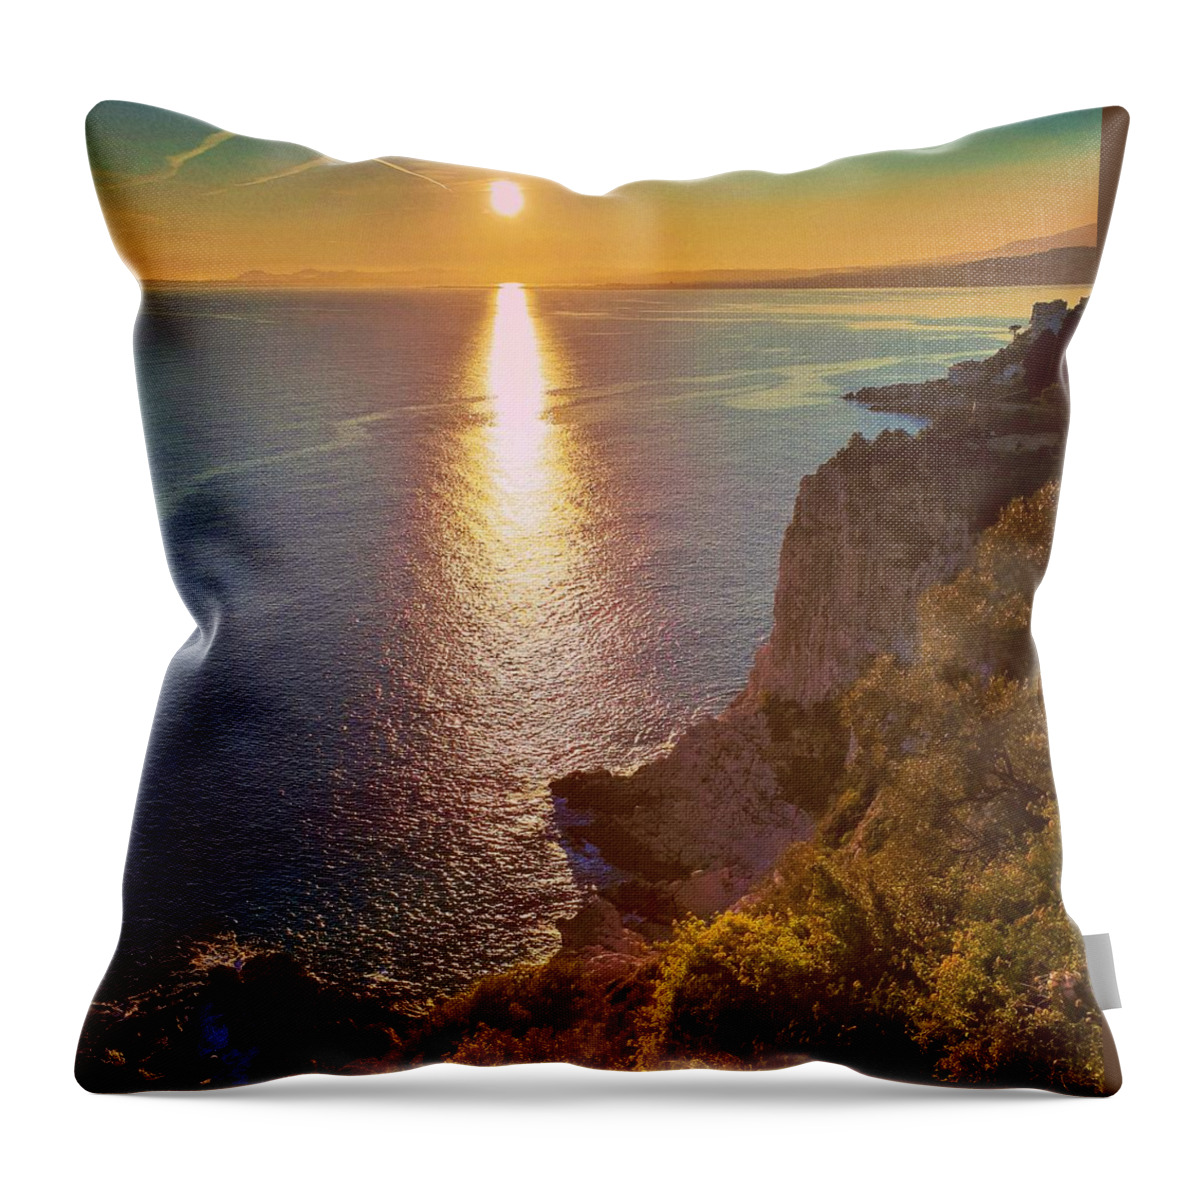 Sunset Throw Pillow featuring the photograph Cote d'Azur Sunset by Andrea Whitaker